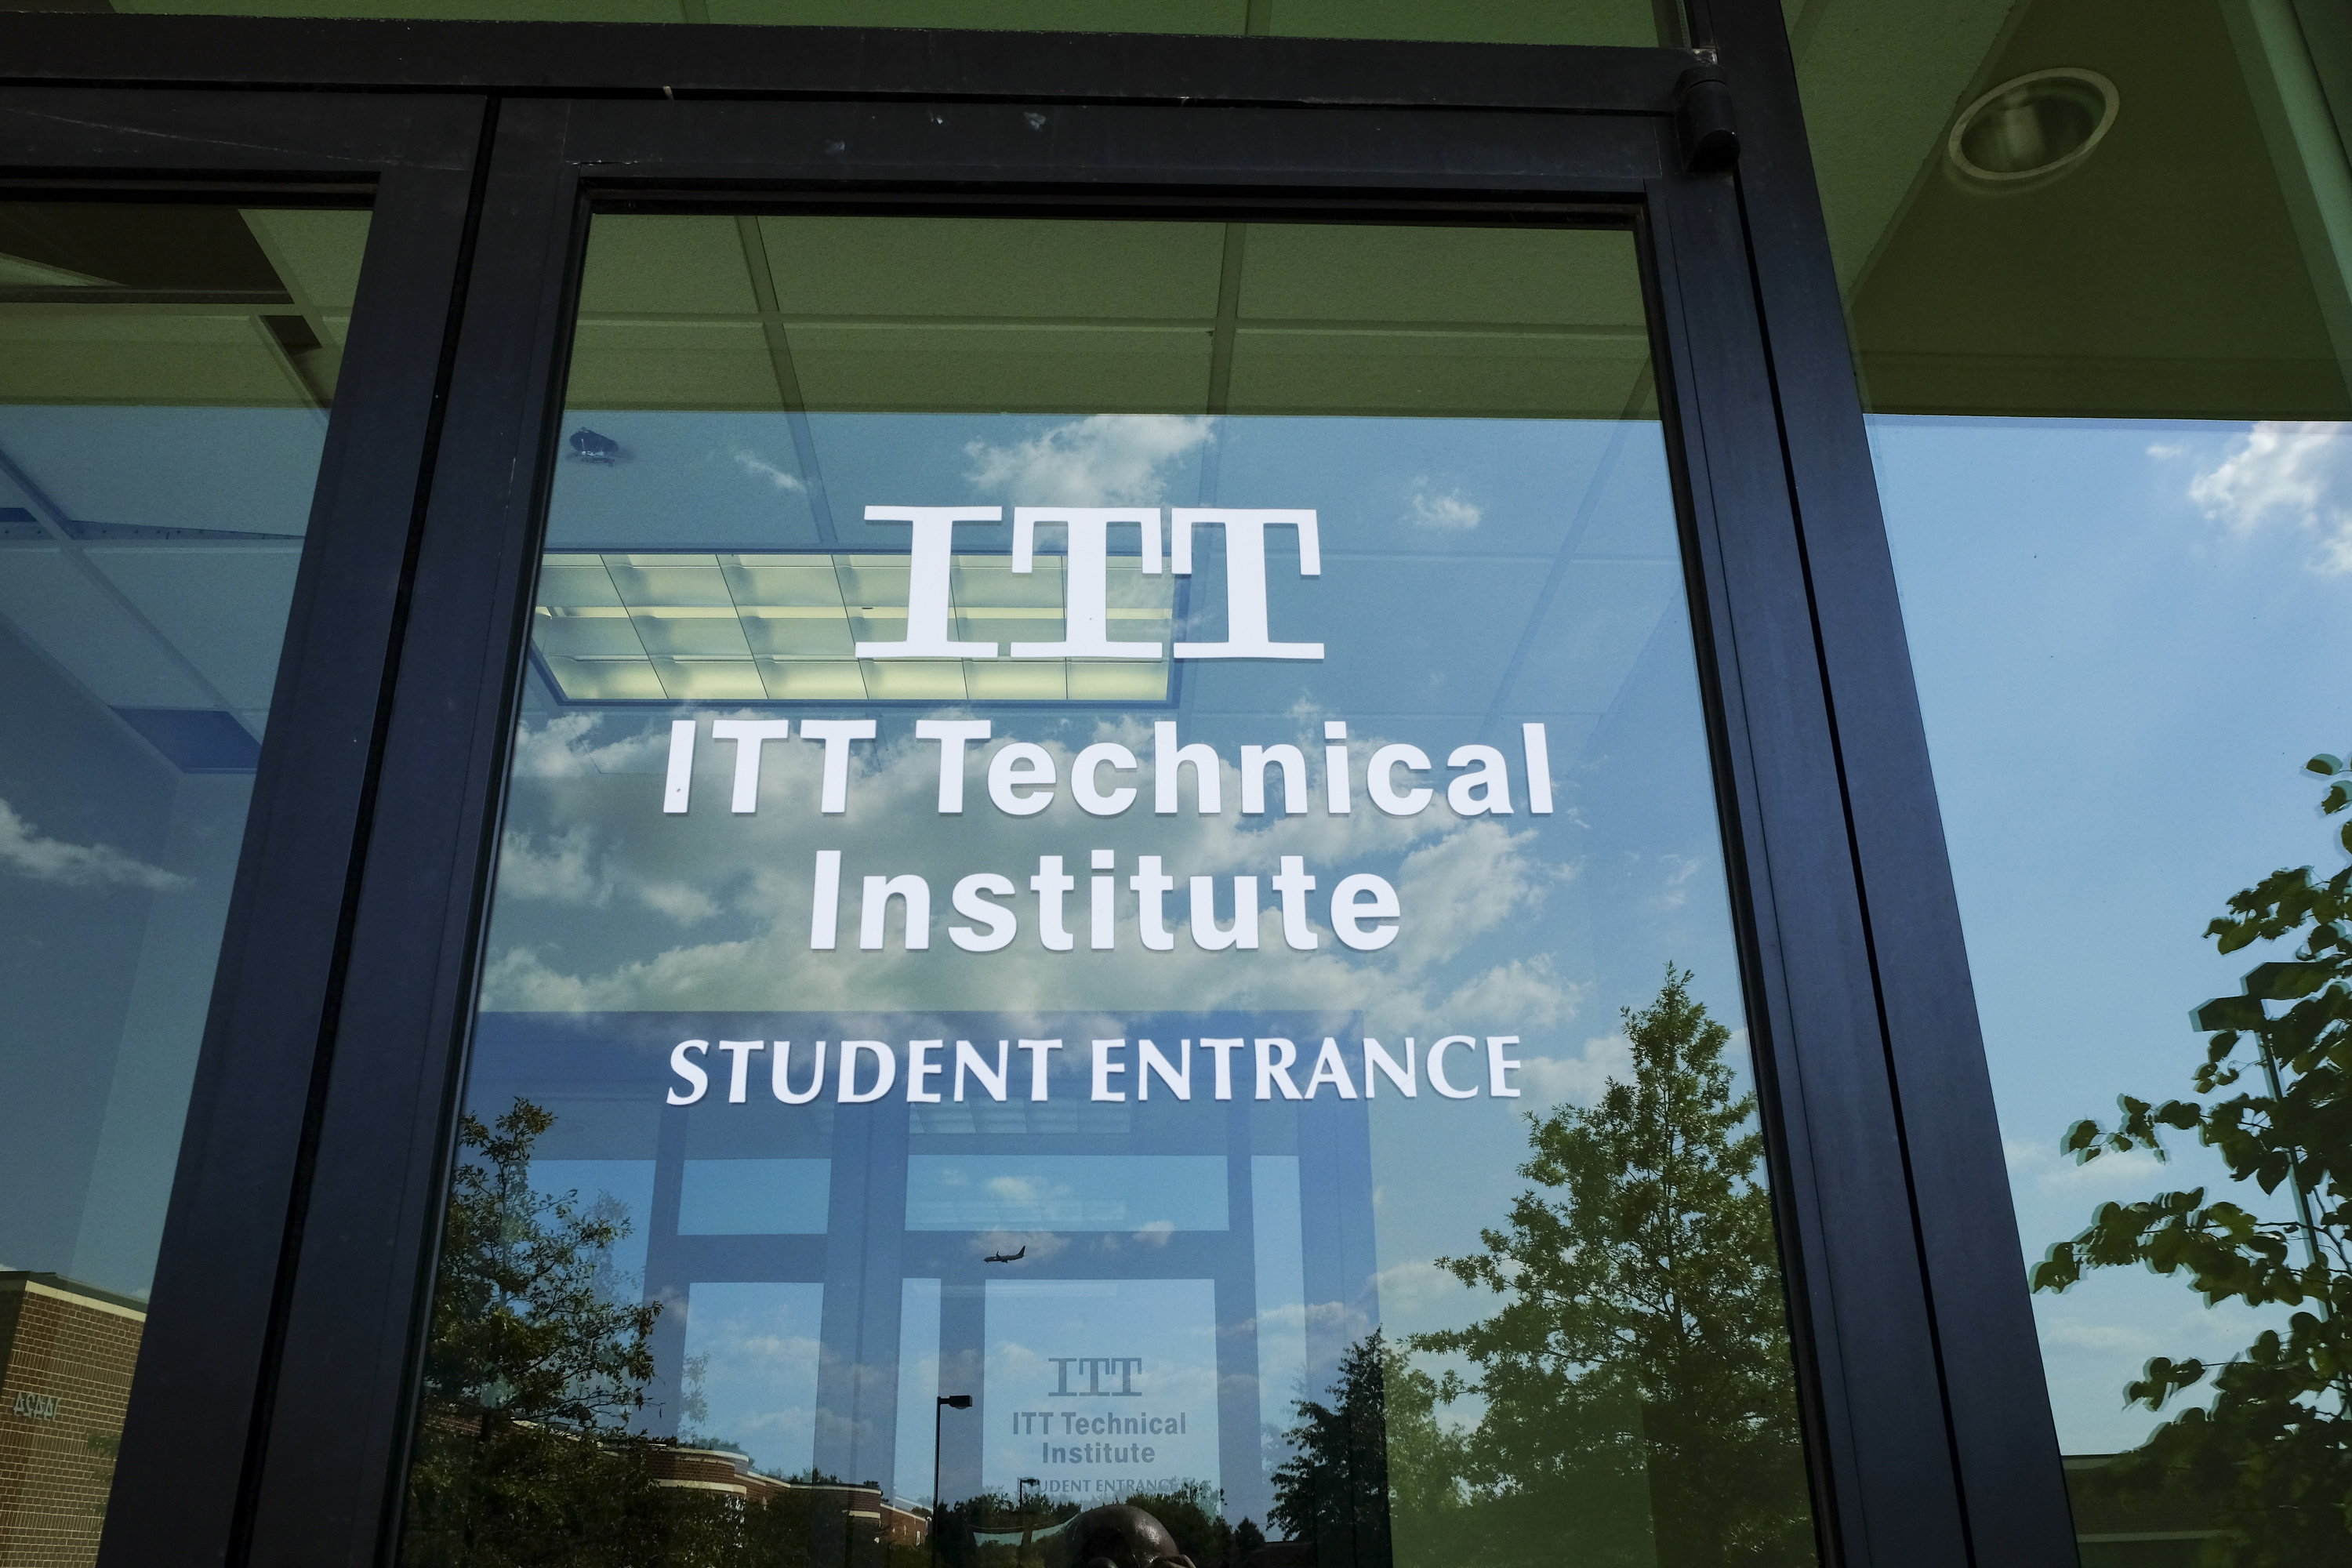 The Chantilly Campus of ITT Technical Institute sits closed and empty on Tuesday, September 6, 2016, in Chantilly, VA. (The Washington Post—The Washington Post/Getty Images)